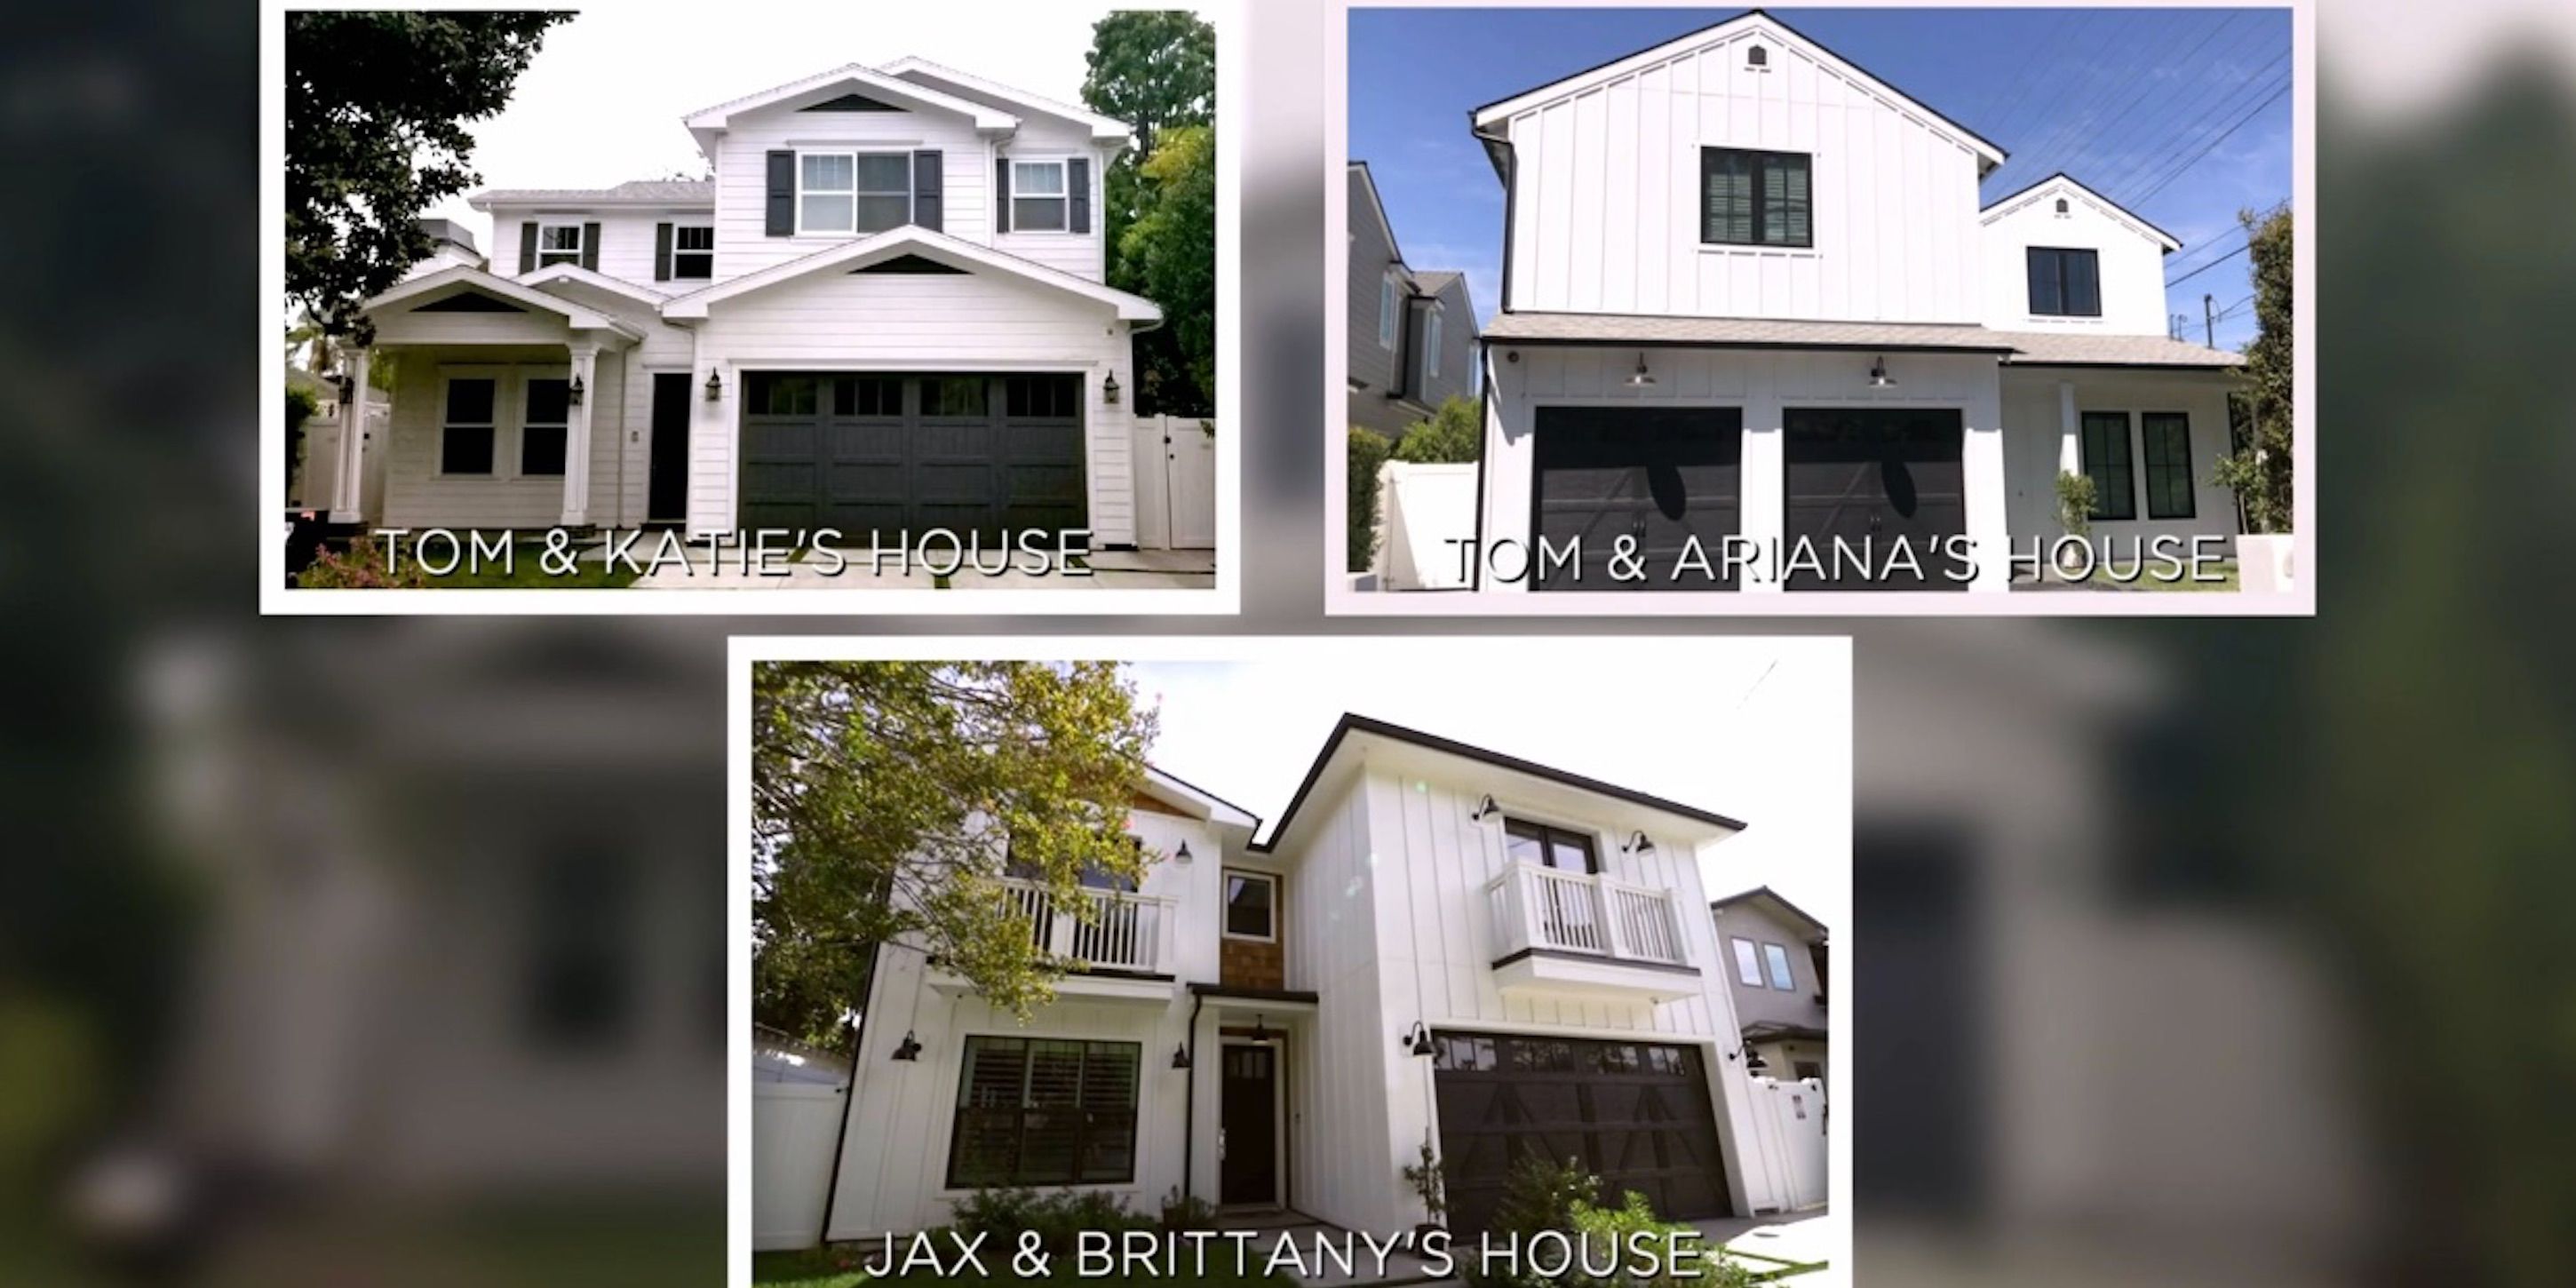 An image of Ariana & Tom's house, Tom & Katie's house, and Jam and Britney's house in the Valley on 'Vanderpump Rules'